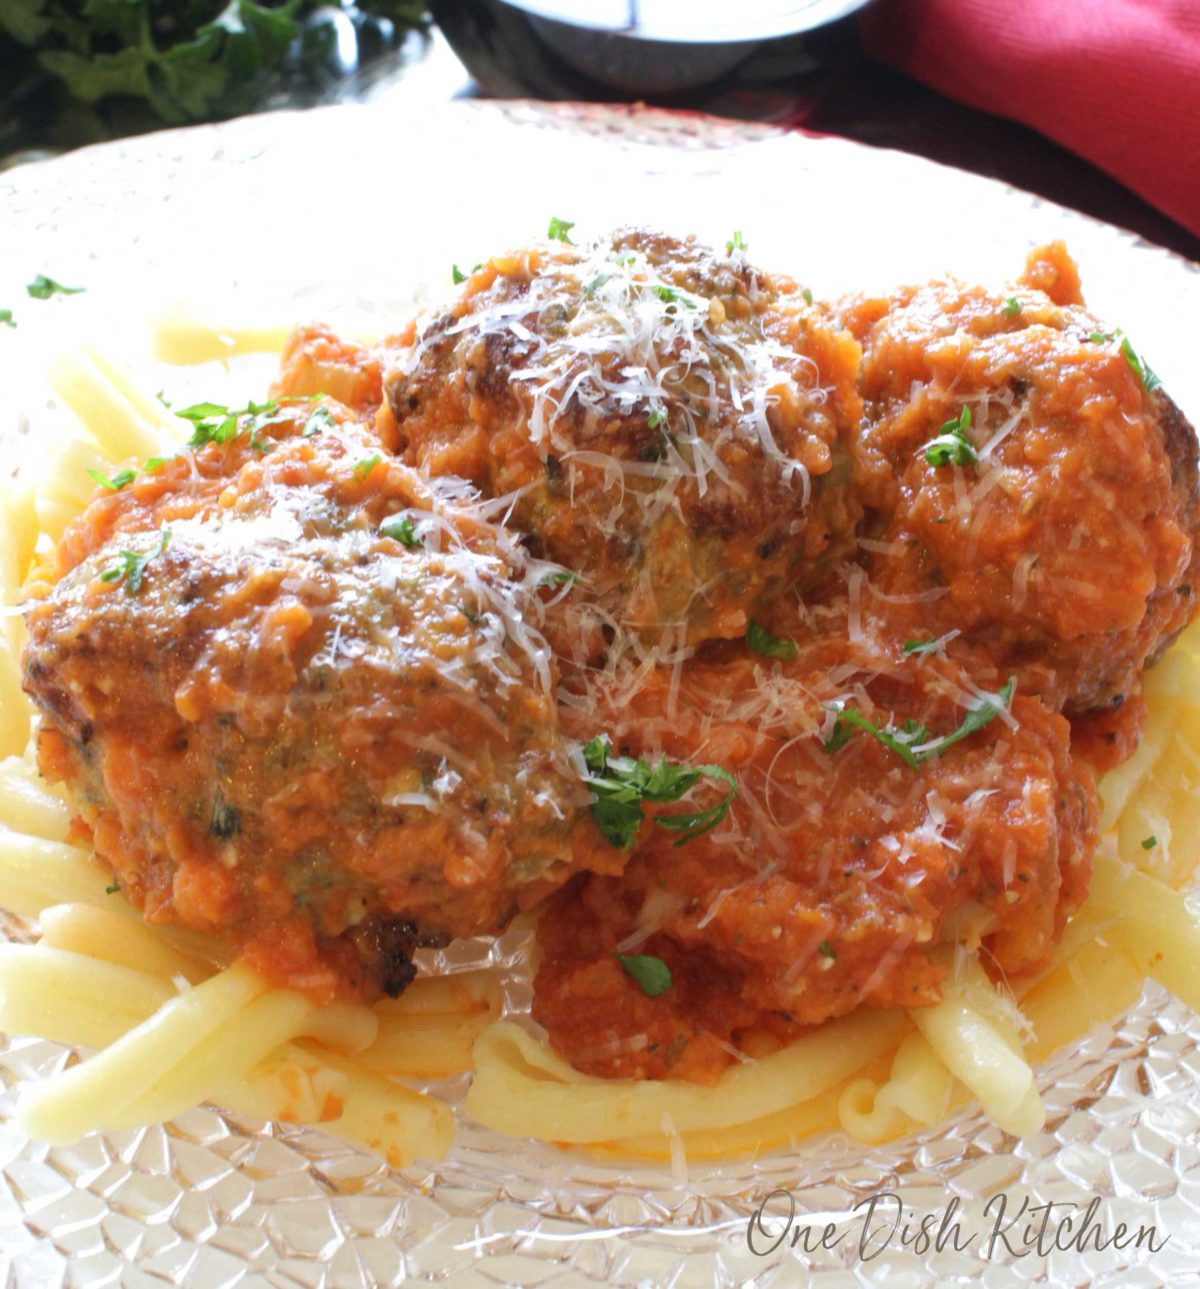 meatballs and tomato sauce over pasta on a white plate